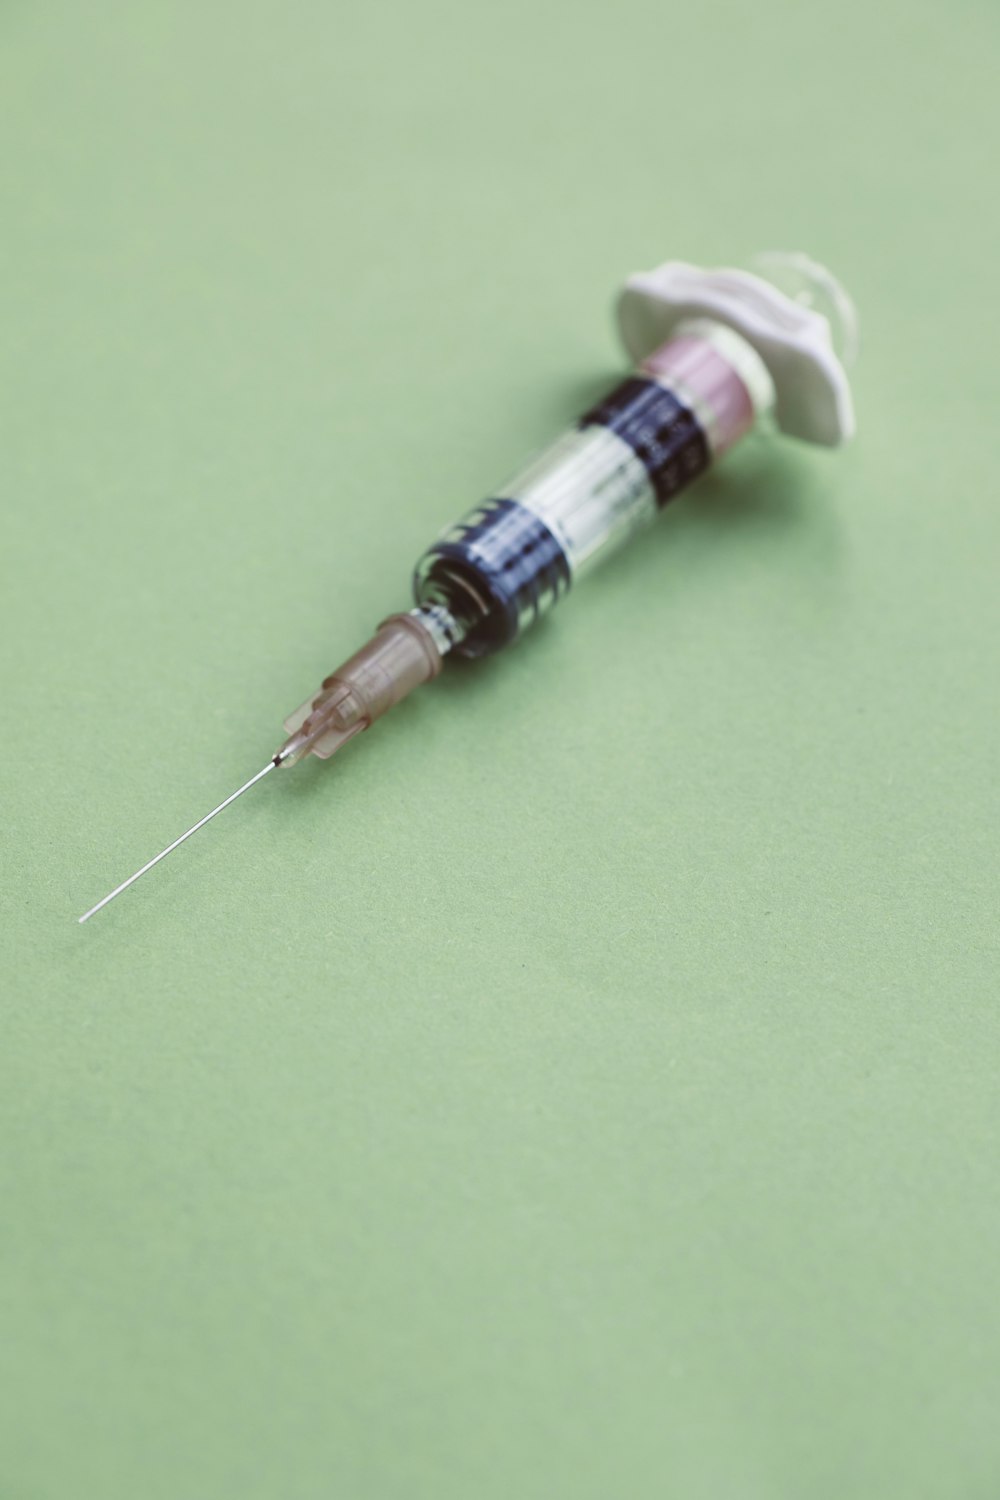 a needle with a needle tip sticking out of it